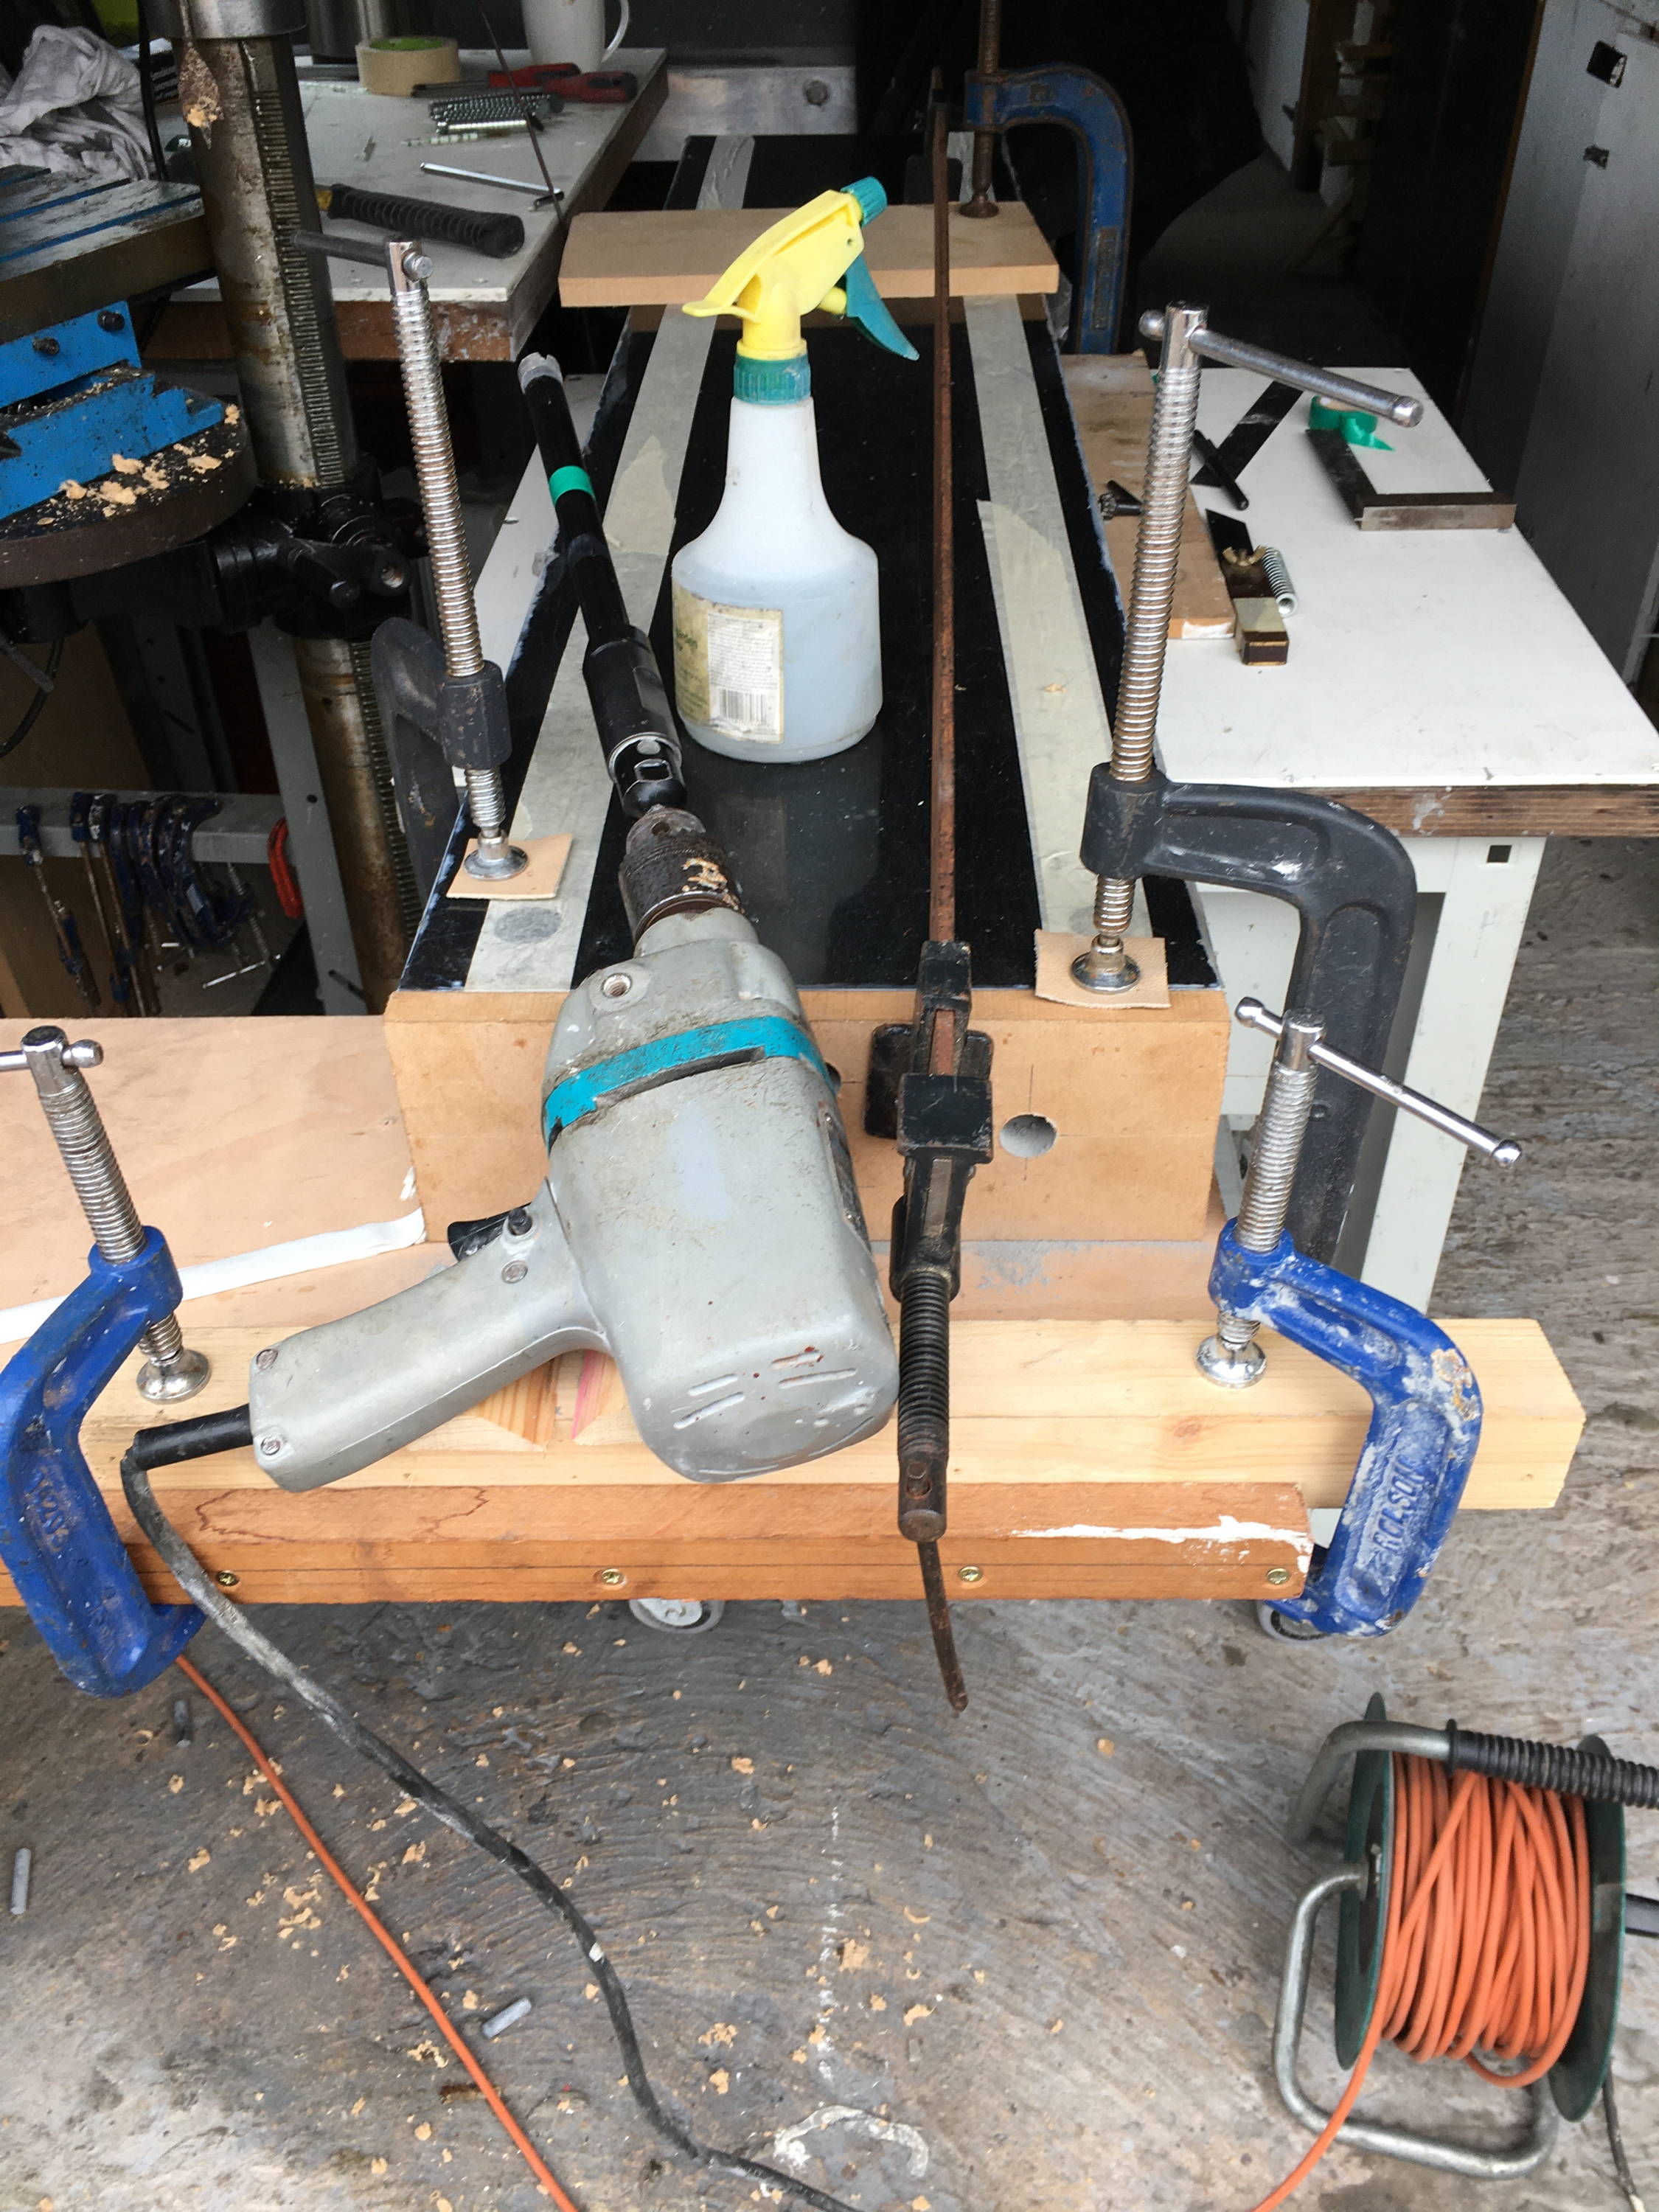 Photograph showing the full jig setup for drilling the granite insert holes.